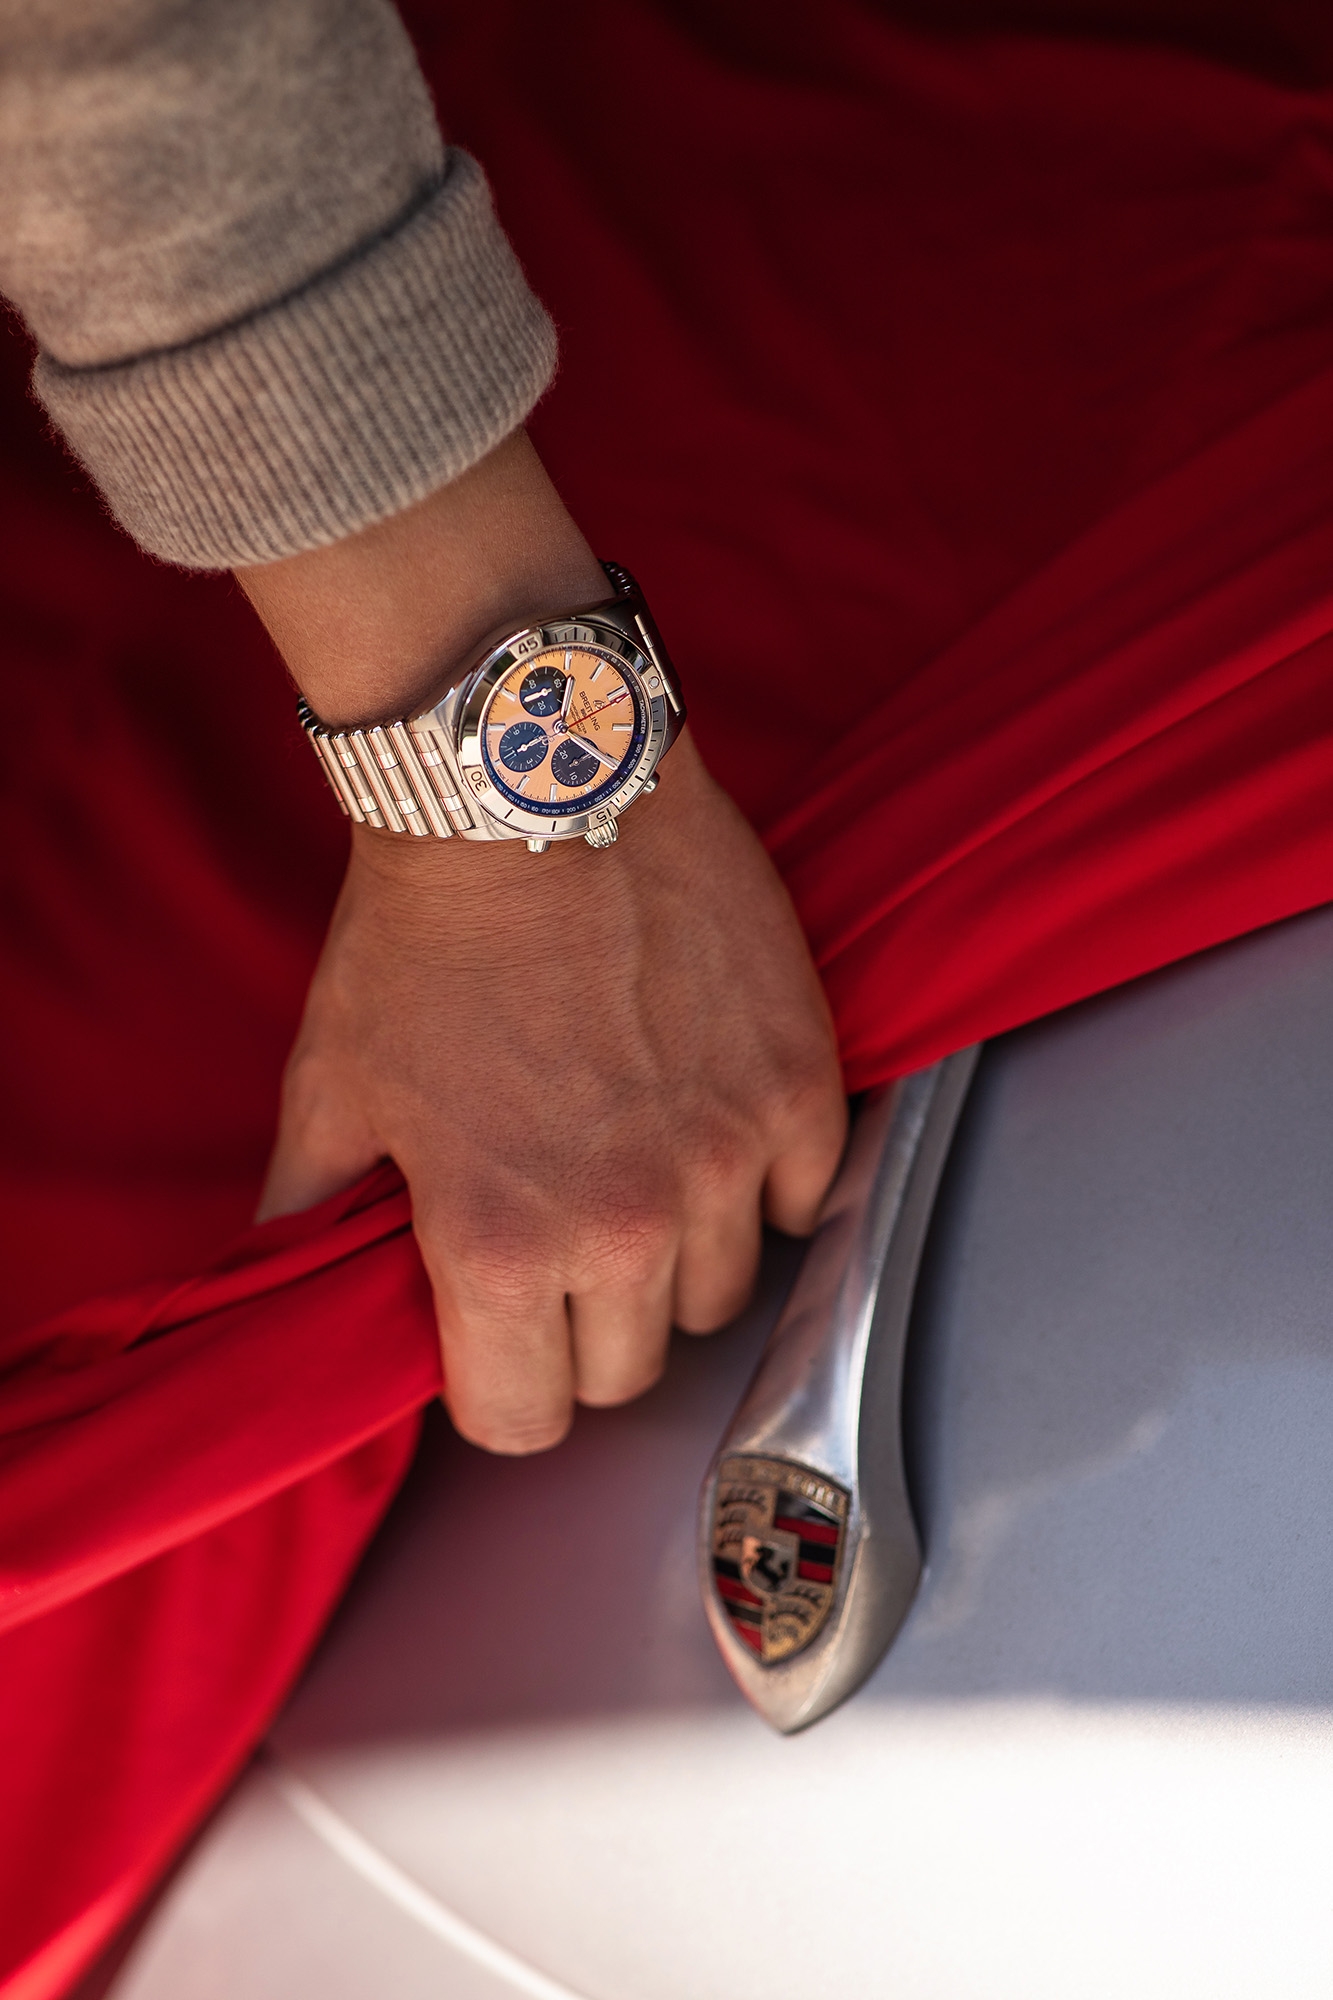 Man wearing Breitling watch covering Porsche with red cloth